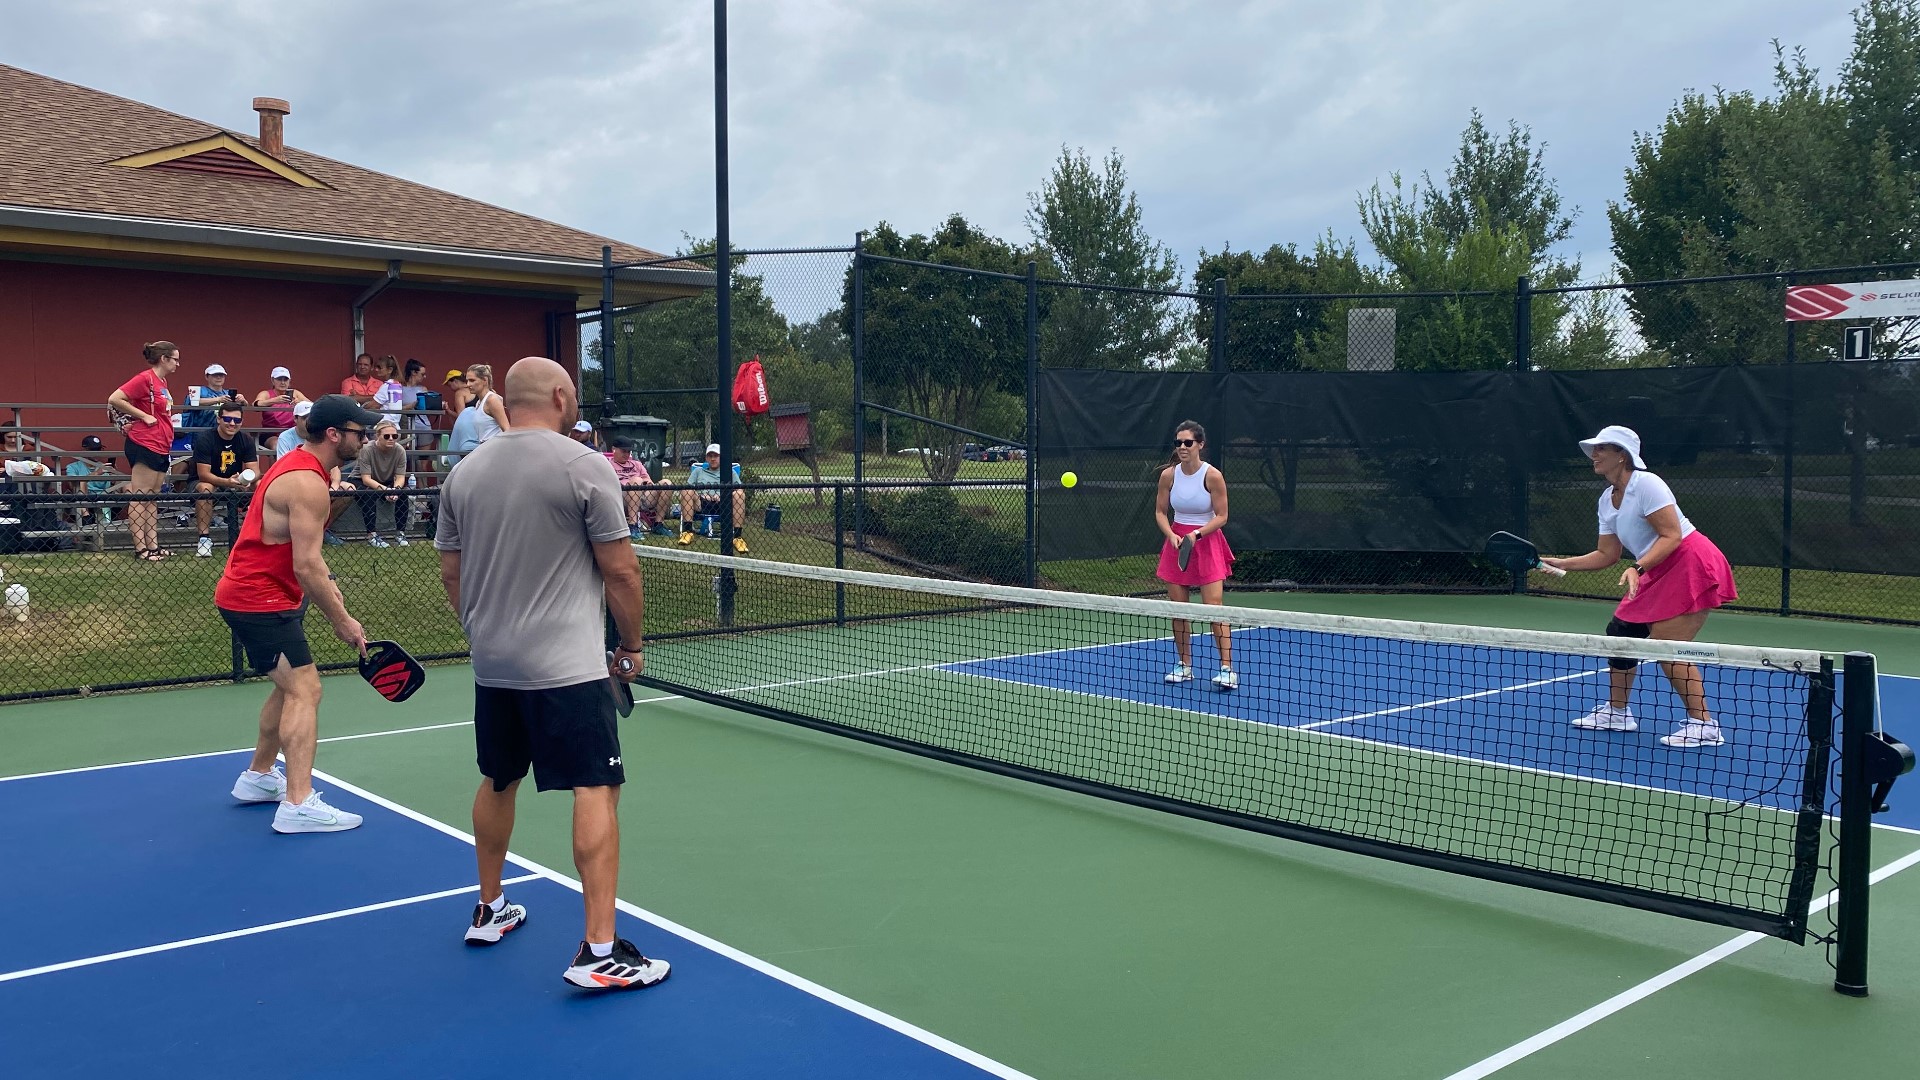 Over 450 players came to play pickleball here in Macon.